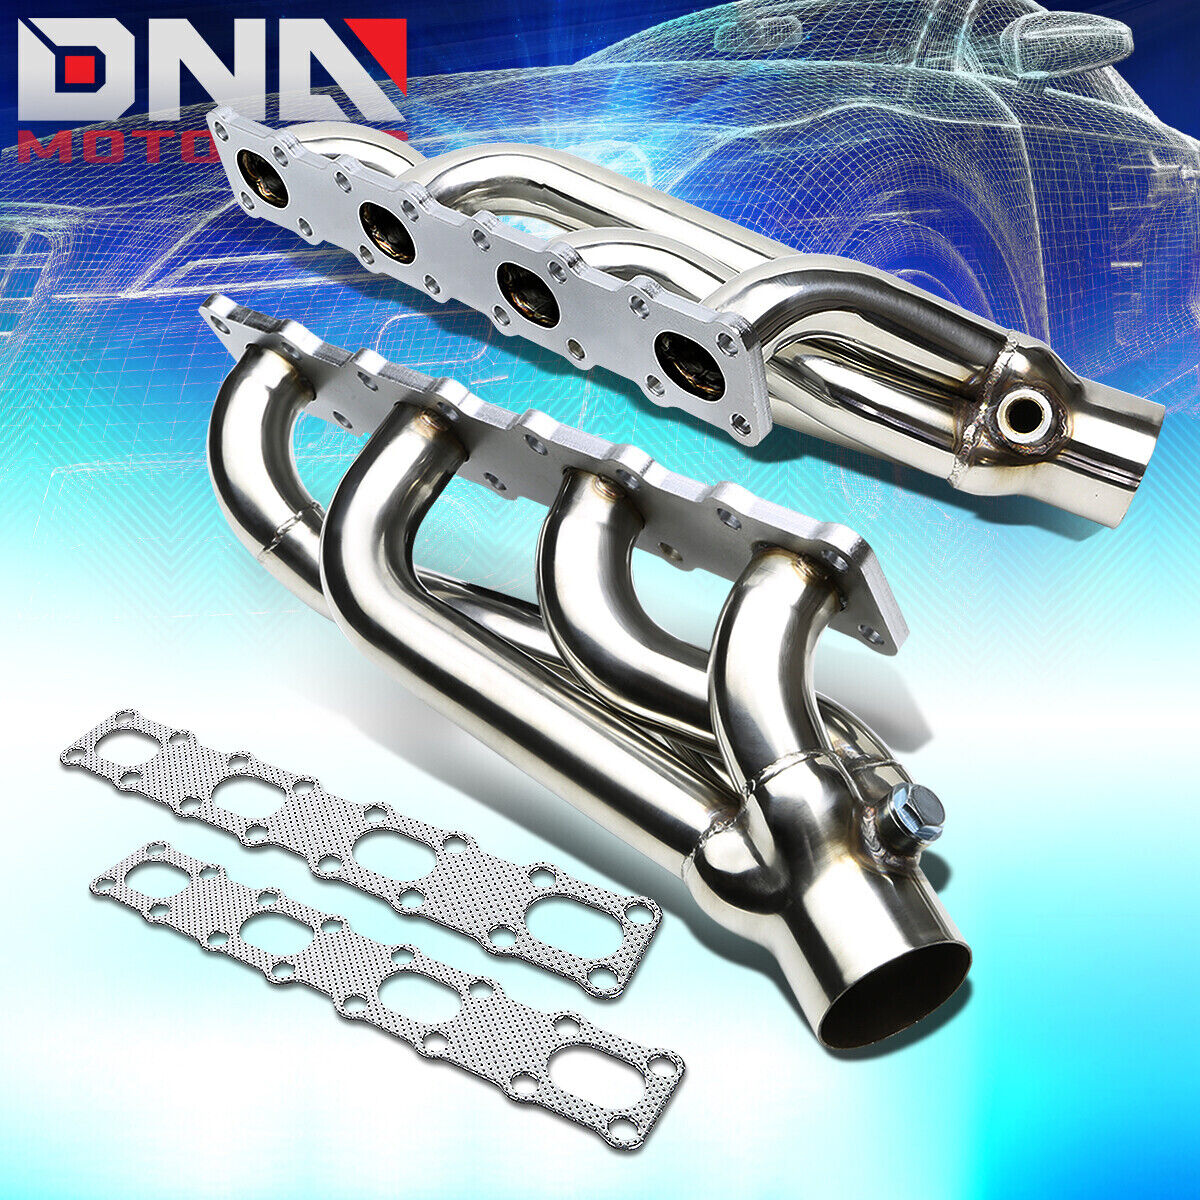 FOR 04-15 NISSAN TITAN/ARMADA 5.6 STAINLESS PERFORMANCE HEADER EXHAUST MANIFOLD